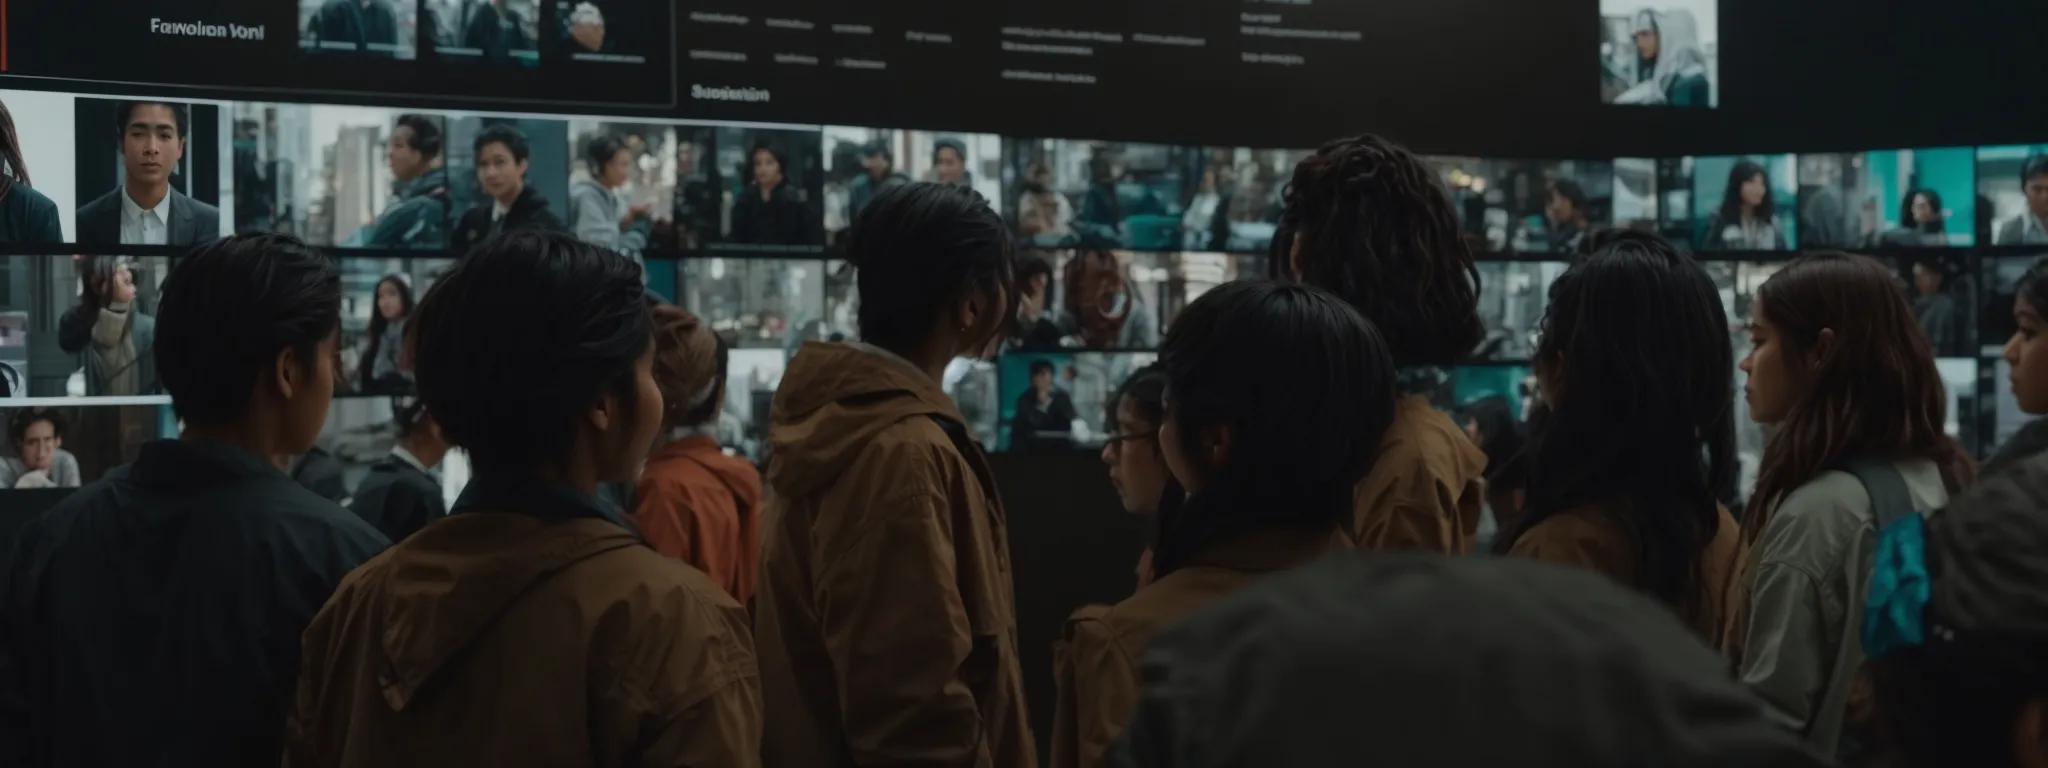 a group of diverse people gather around a digital screen, engaging with a website that displays prominent yet unobtrusive social media share icons.